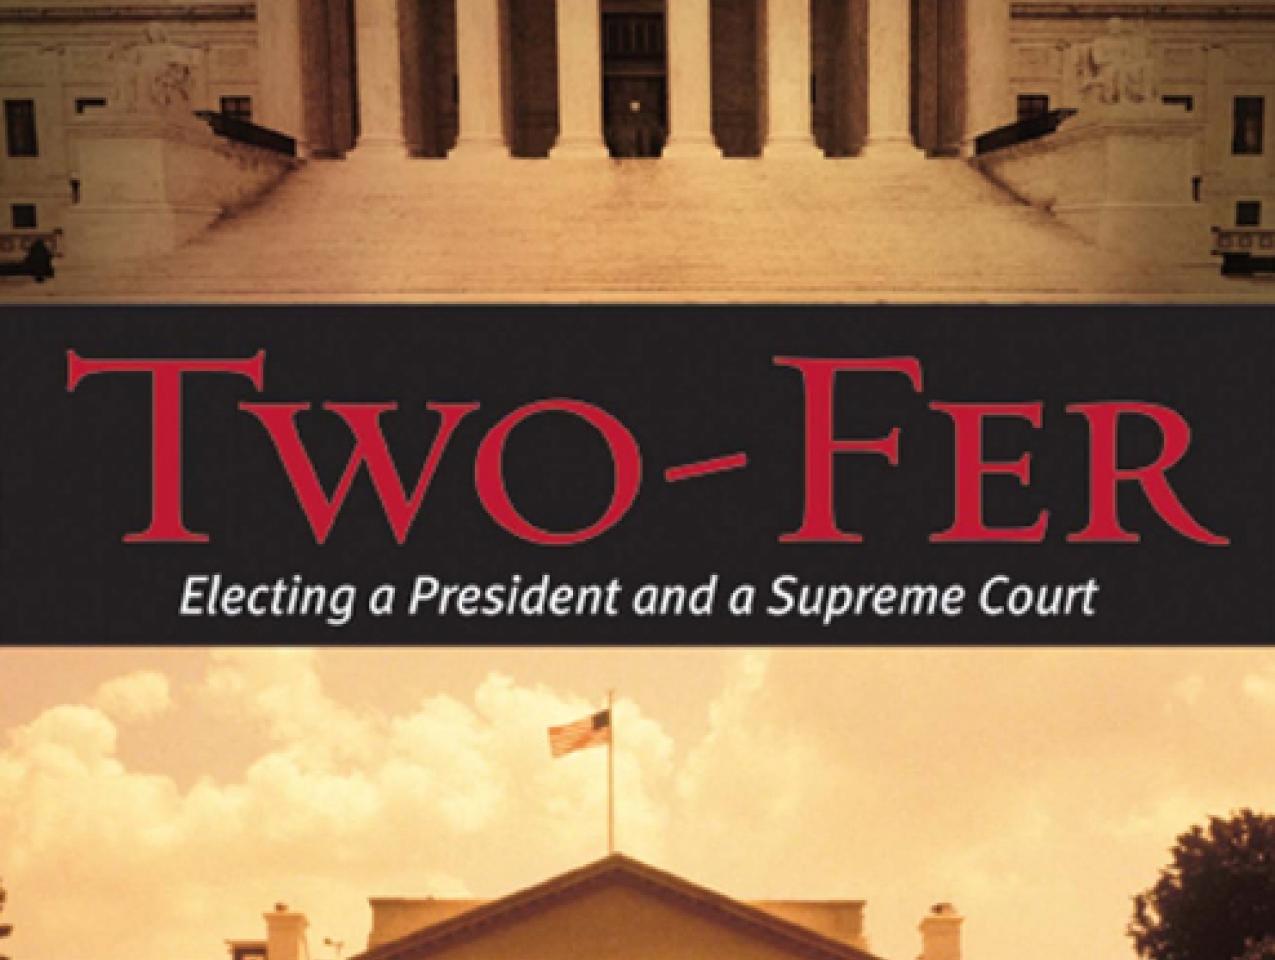 Two-Fer: Electing a President and a Supreme Court by Hoover research fellow and 